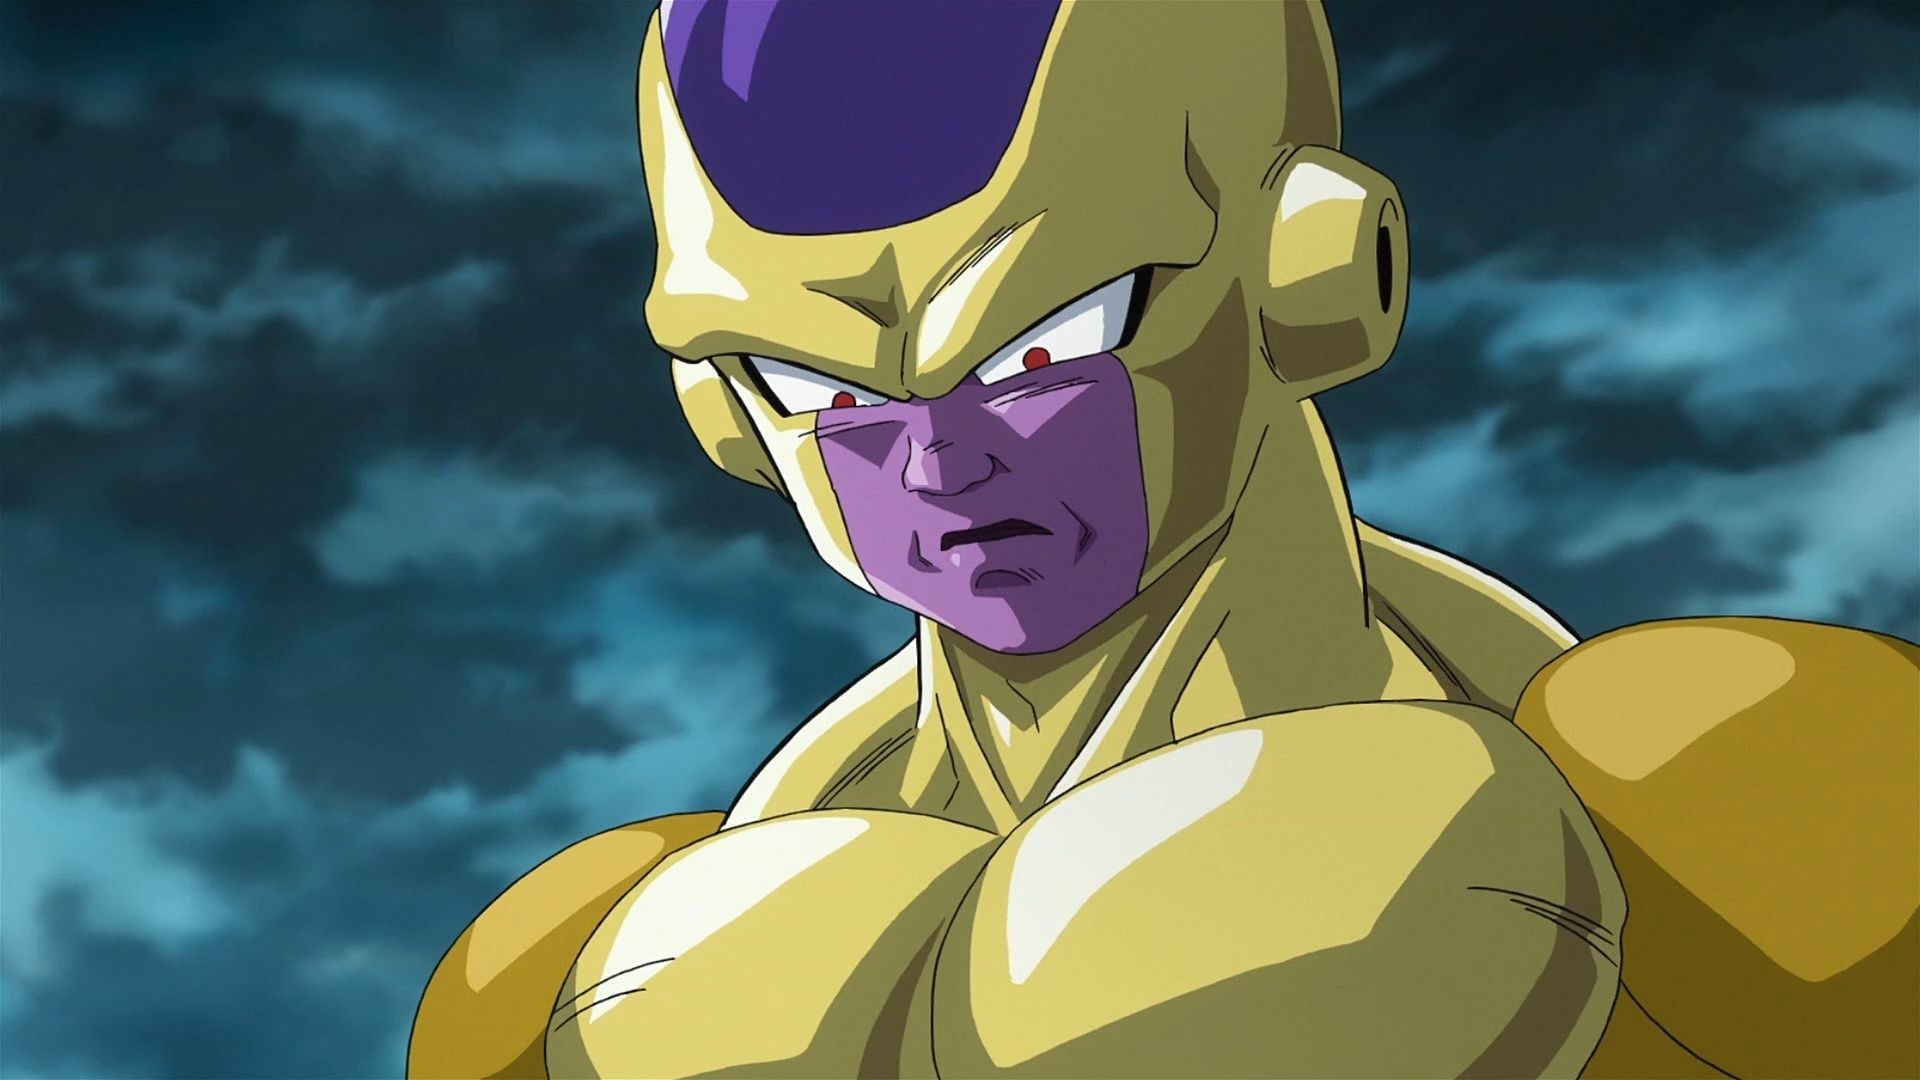 Golden Frieza: Transformation 4, Final form, Dragon Ball fighters, Published by Bandai Namco. 1920x1080 Full HD Wallpaper.